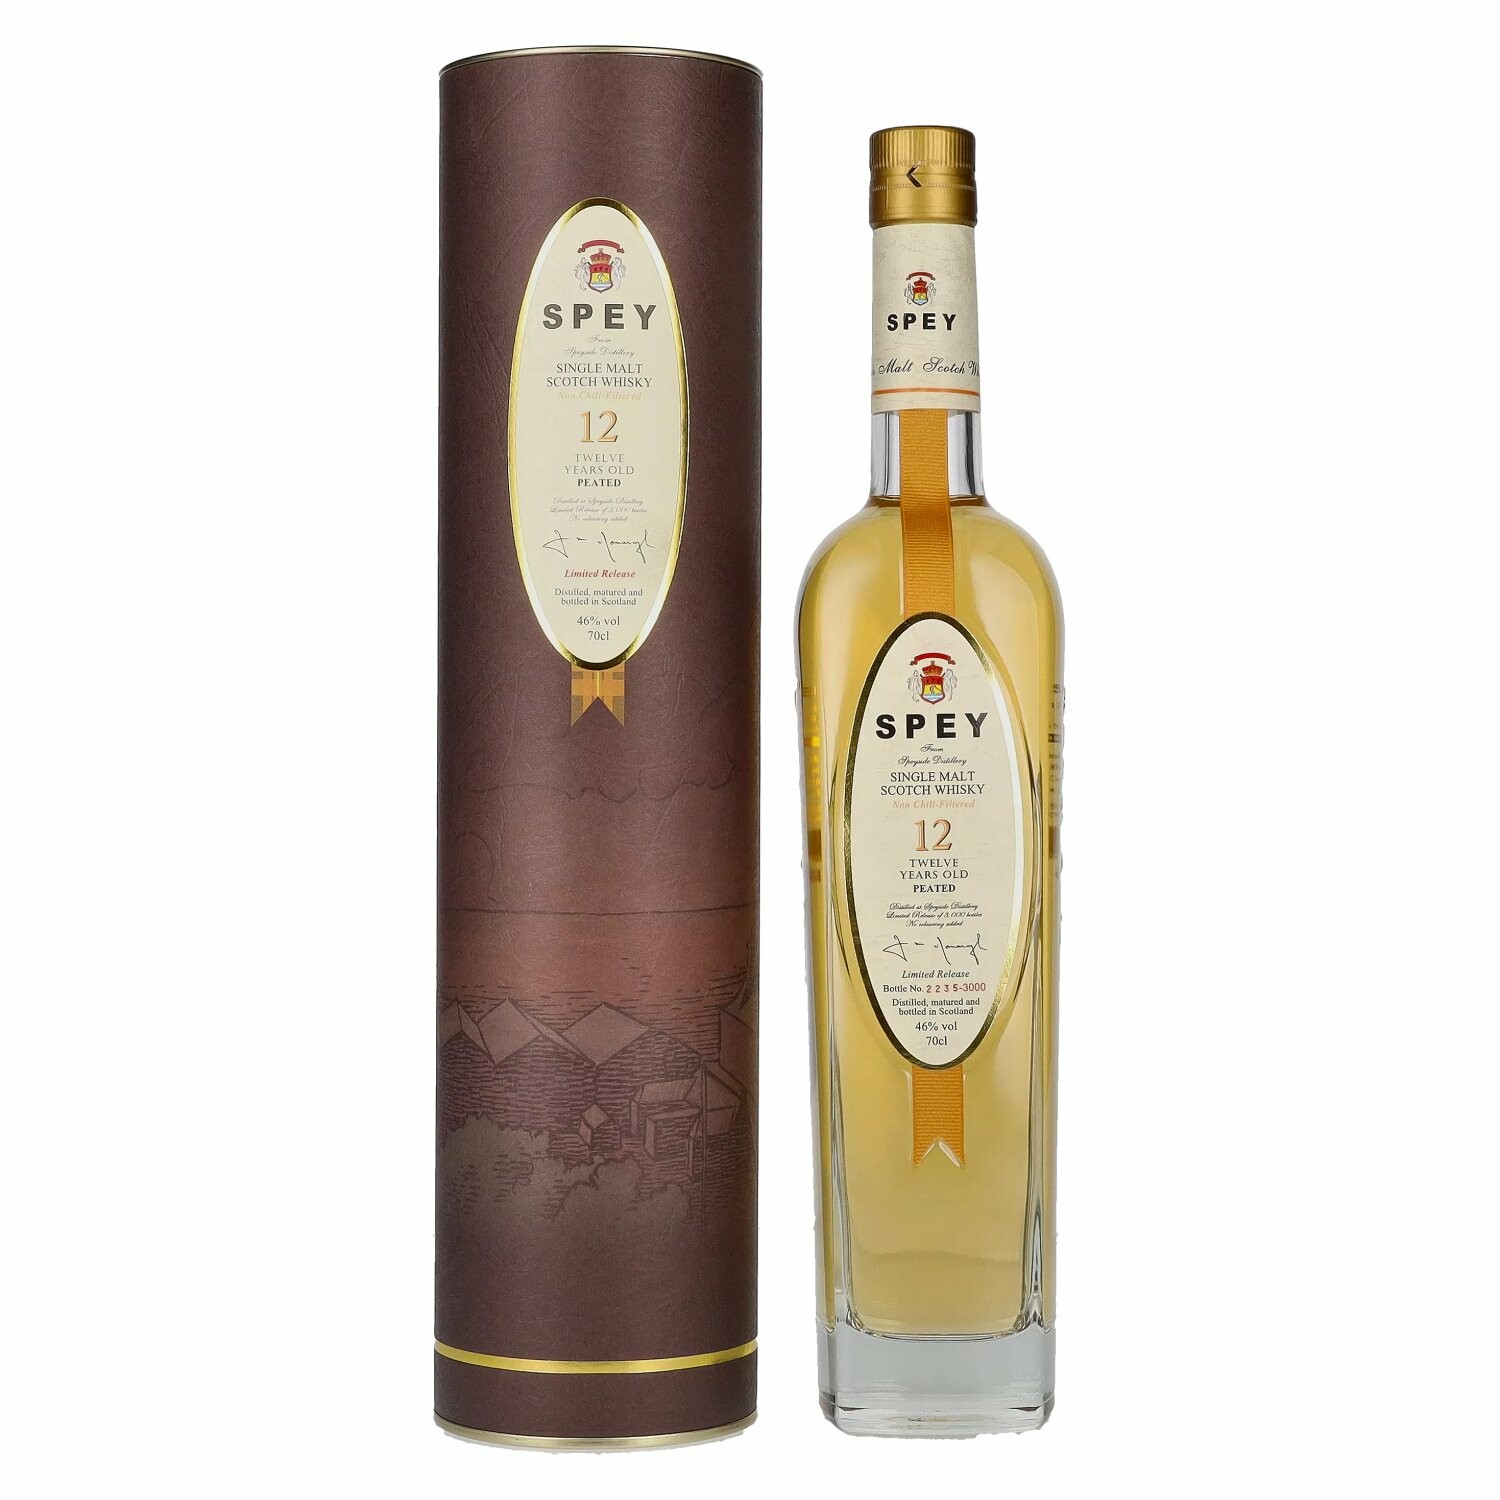 Spey 12 Years Old Peated Single Malt Scotch Whisky Limited Release 46% Vol. 0,7l in Giftbox